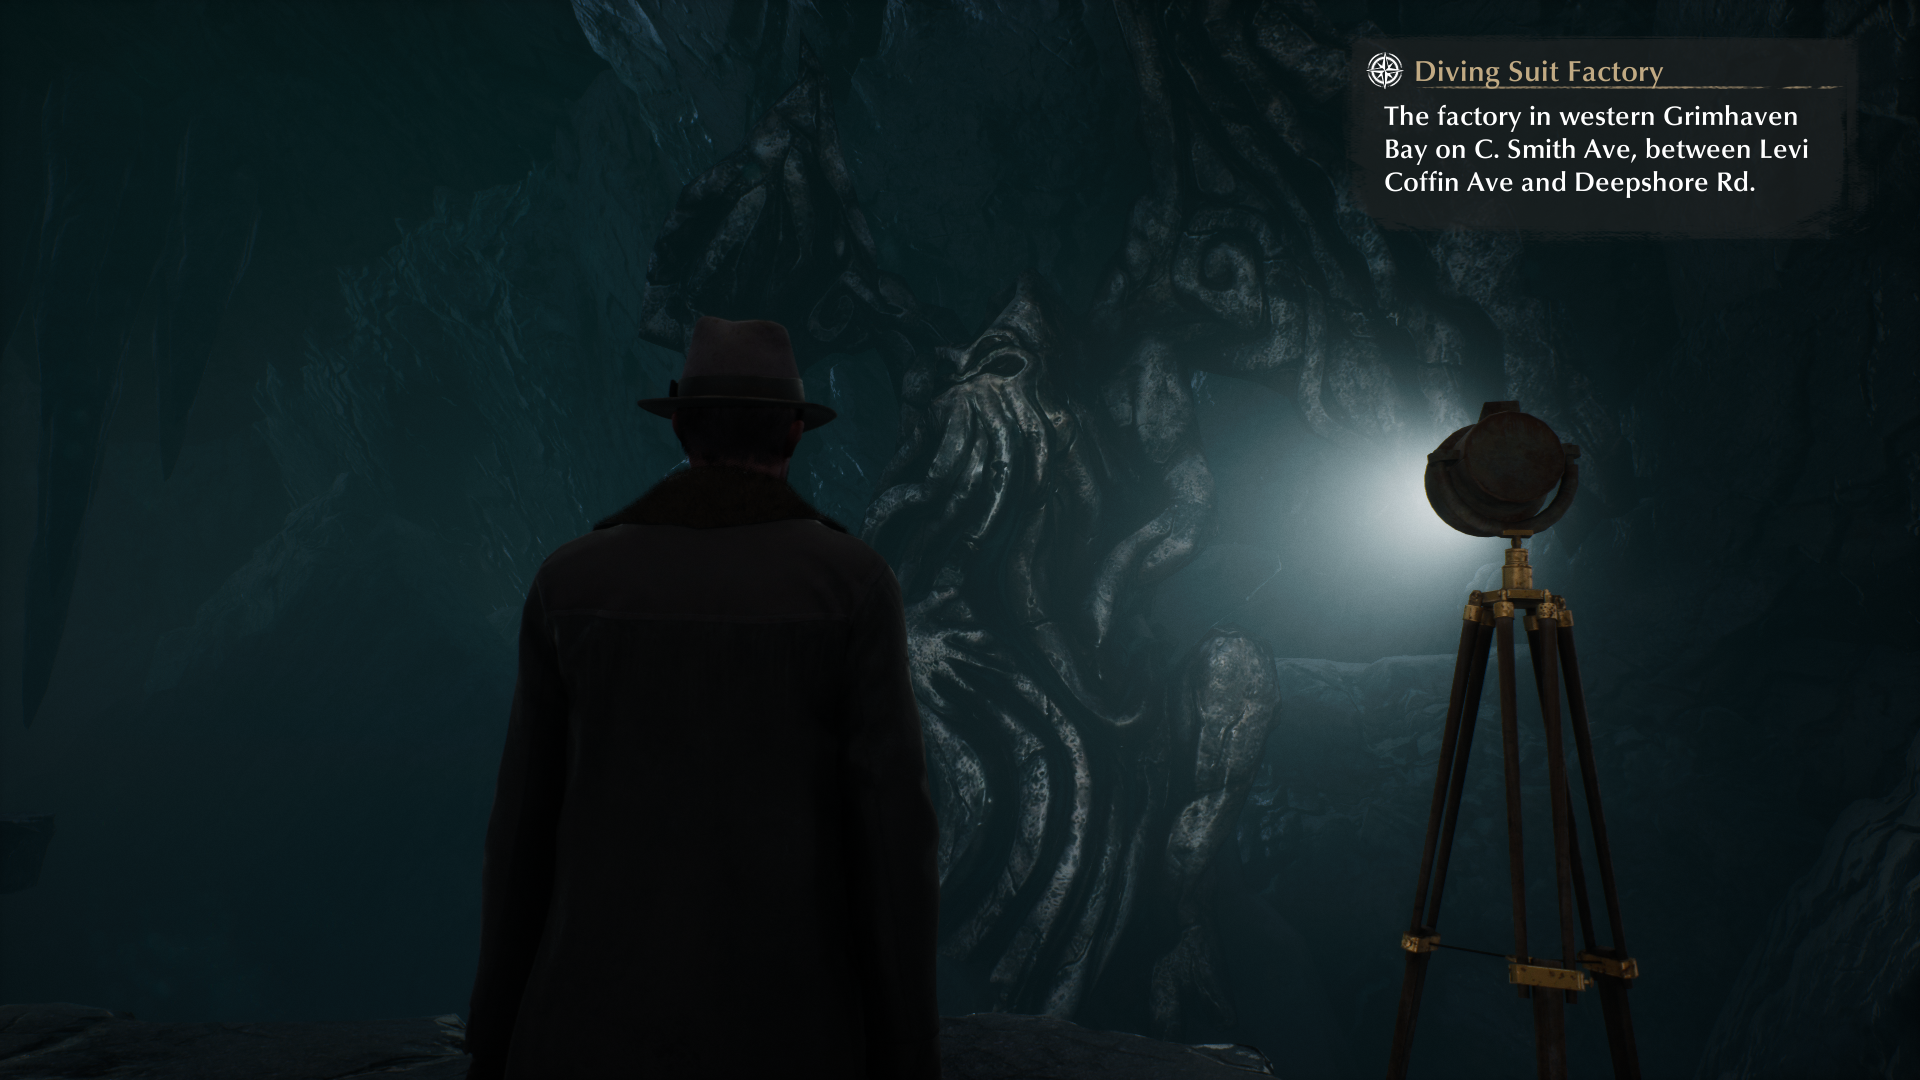 Reed looking at a Cthulhu statue inside an excavation